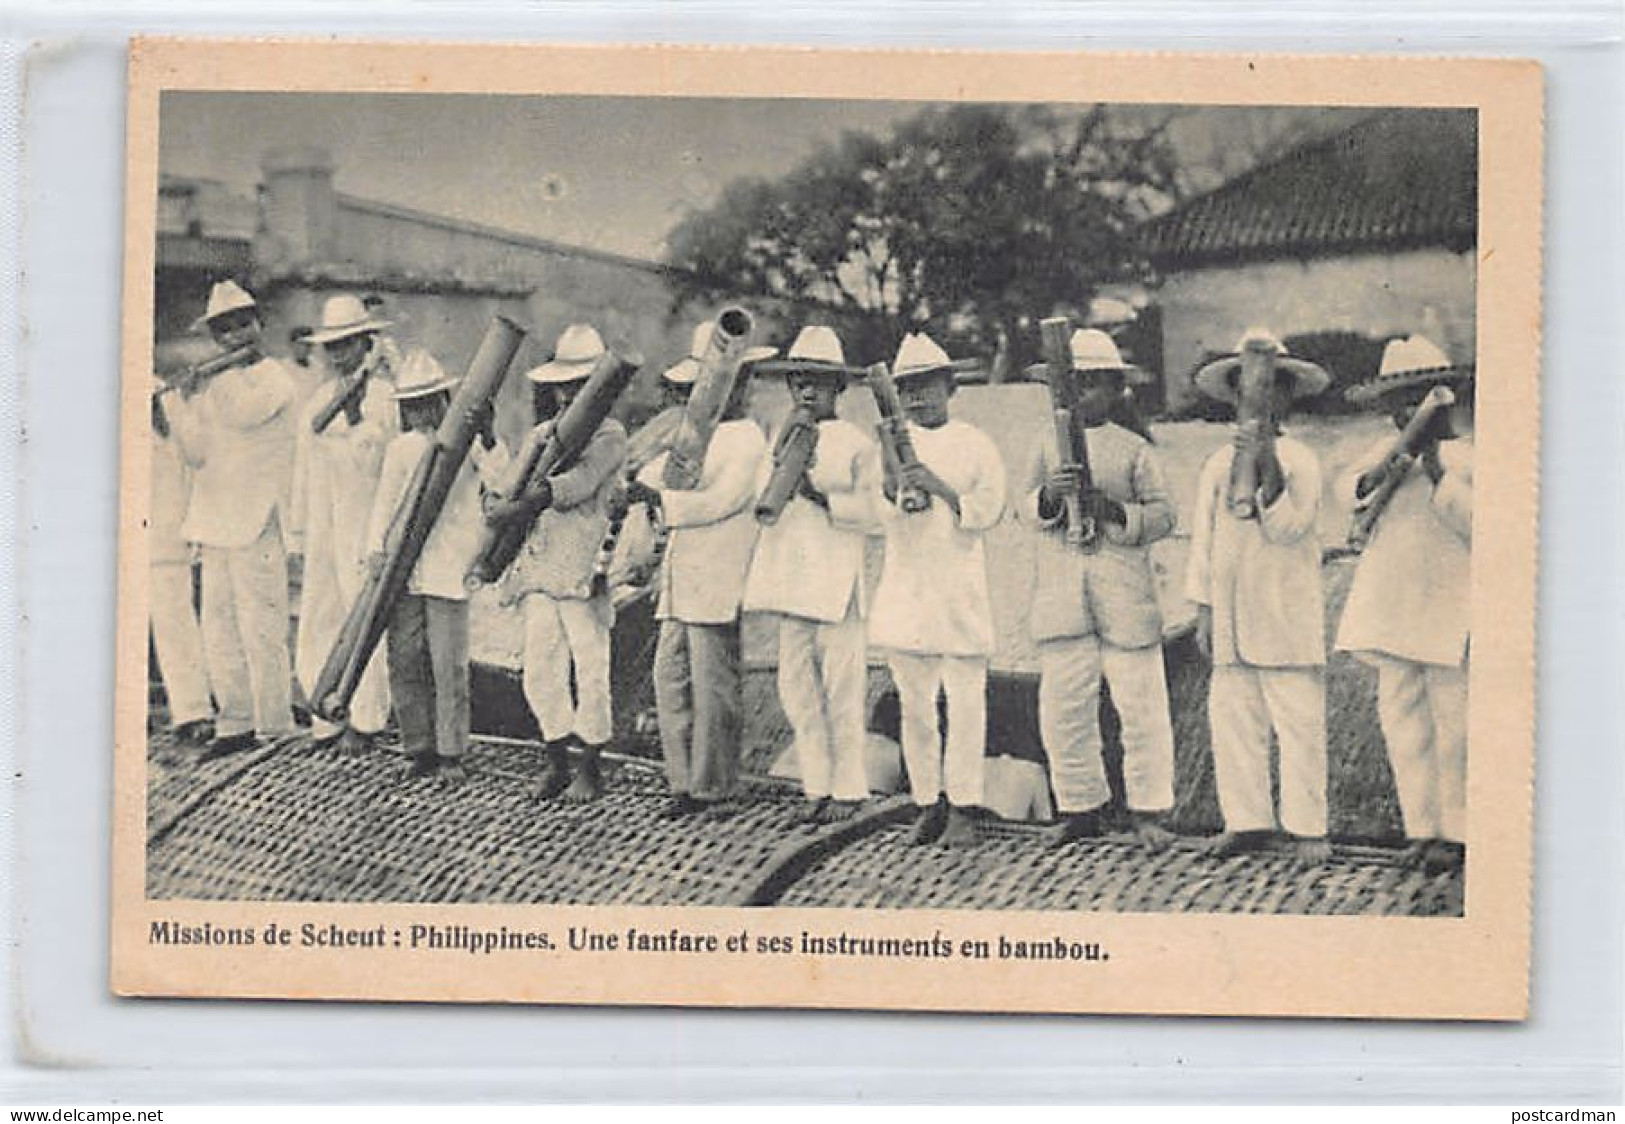 Philippines - A Marching Band And Its Bamboo Instruments - Publ. Missiën Van Scheut - Scheut Missions  - Philippinen